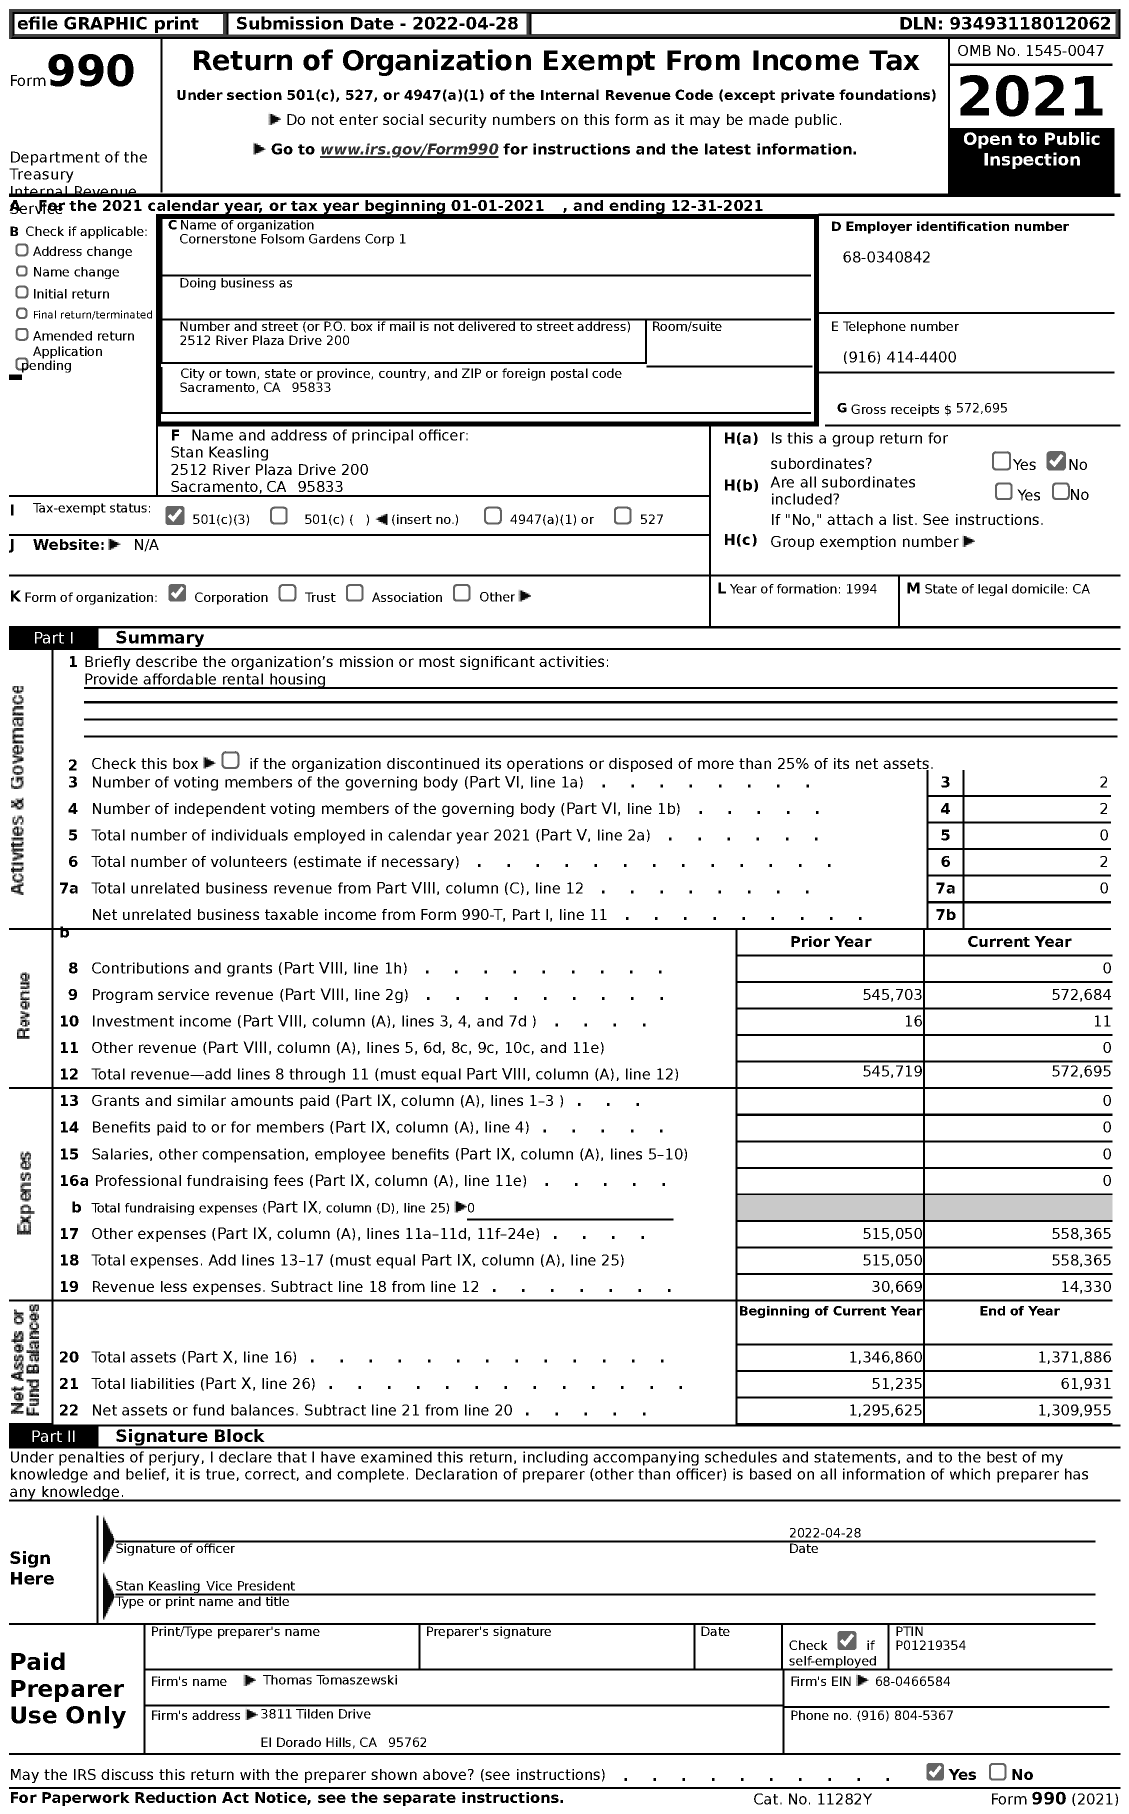 Image of first page of 2021 Form 990 for Cornerstone Folsom Gardens Corporation I